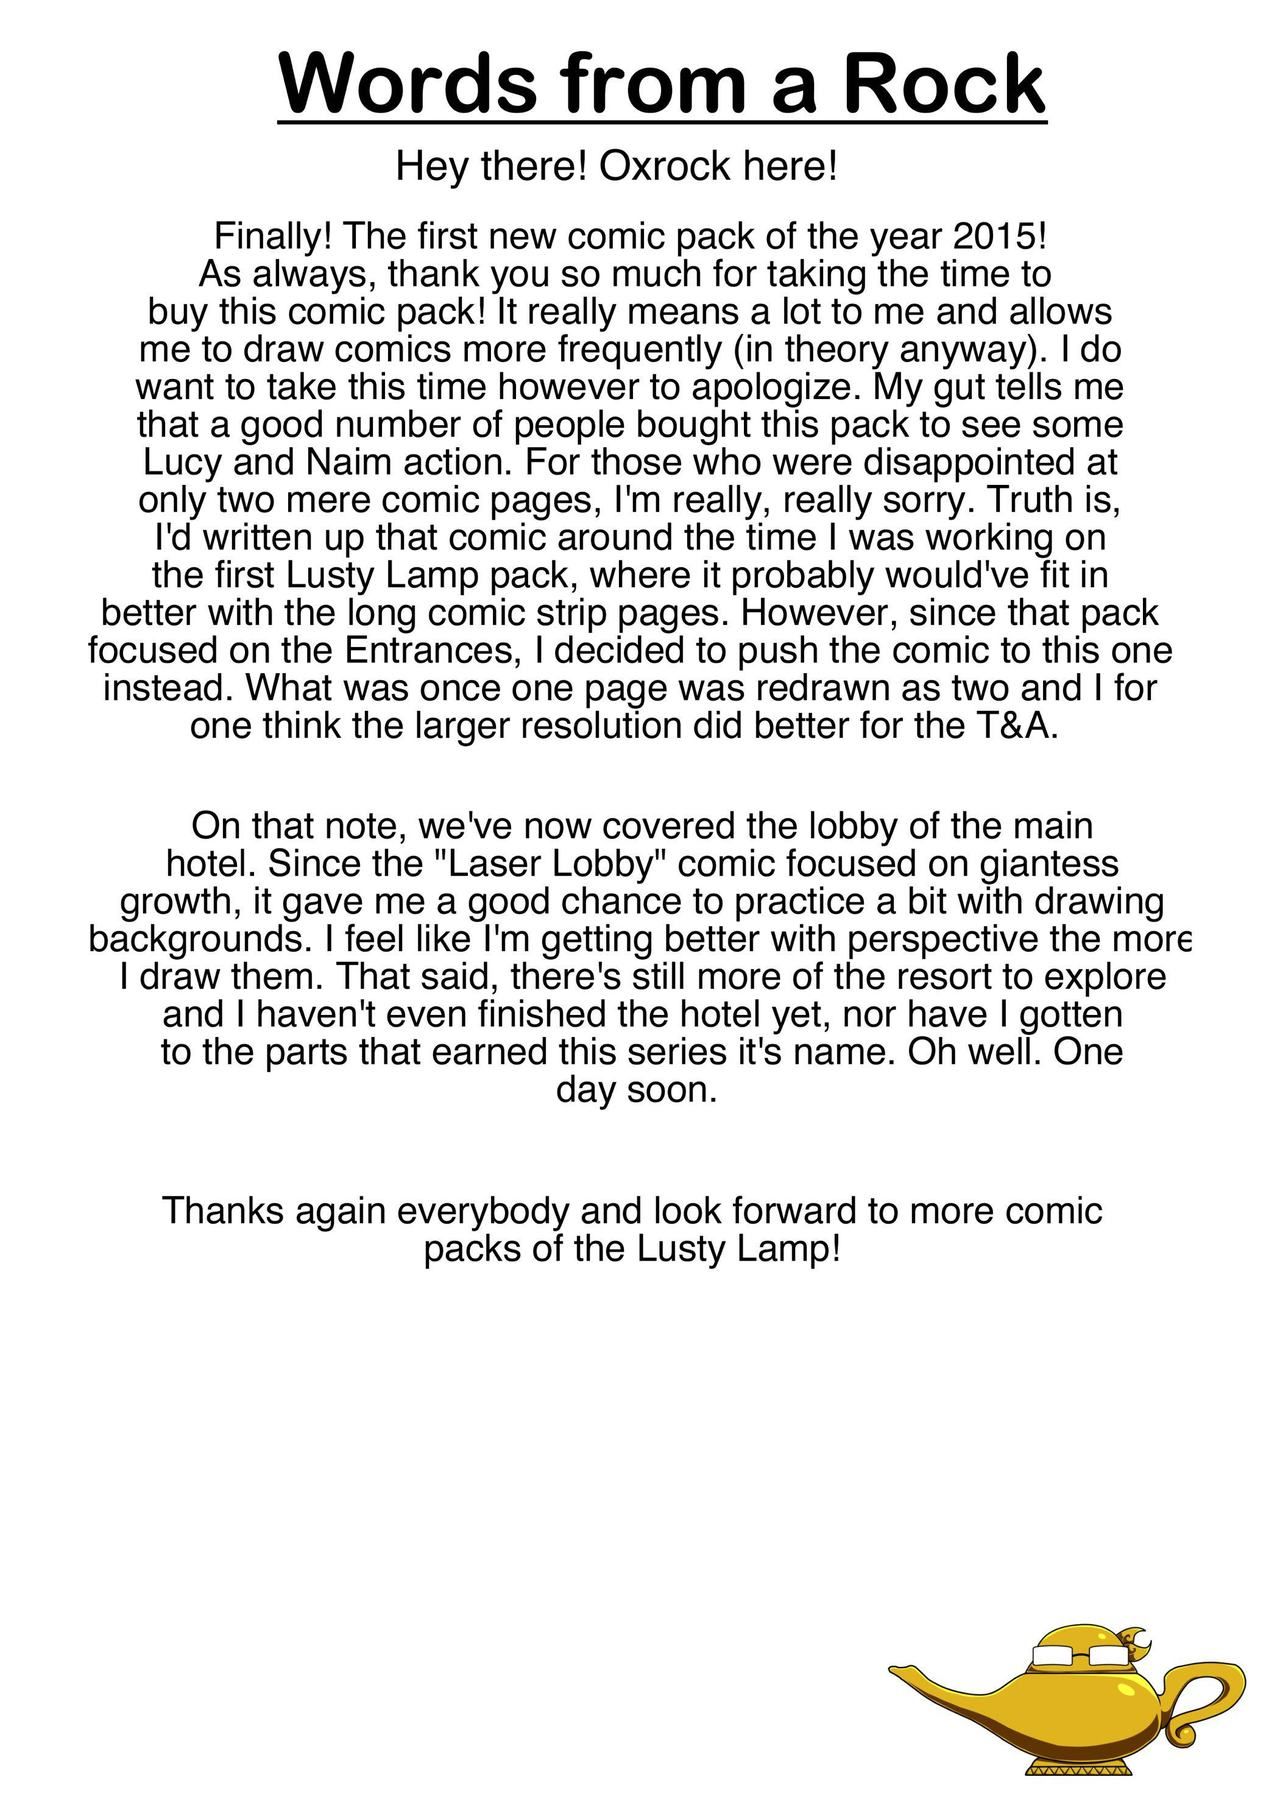 The Lusty Lamp: The Hotel - part 2